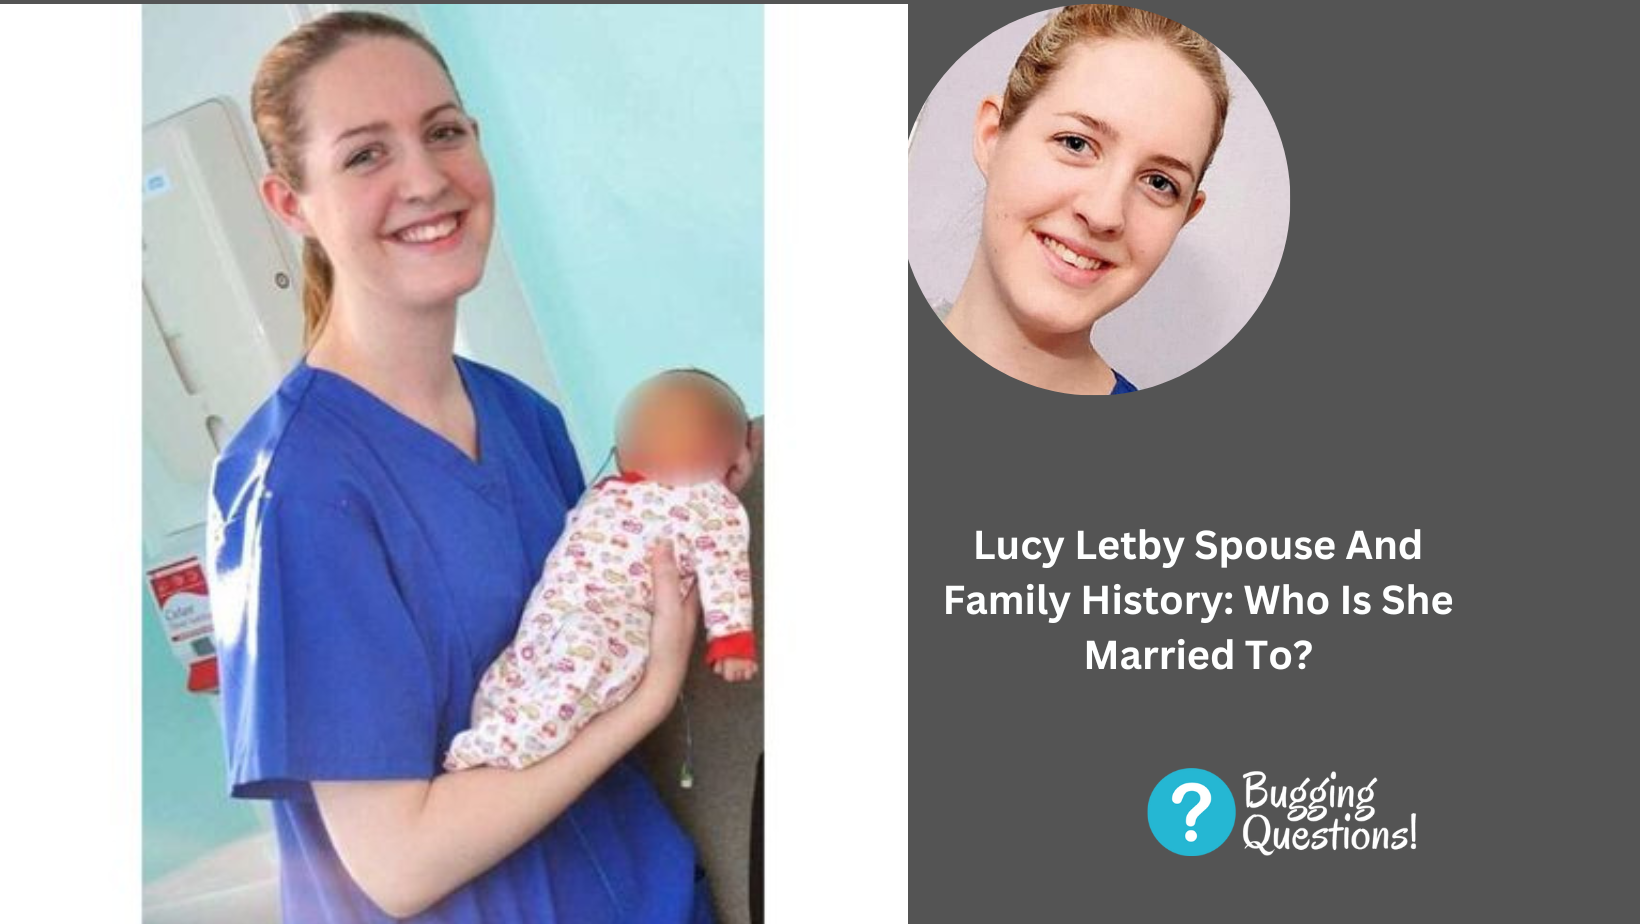 Lucy Letby Spouse And Family History: Who Is She Married To?